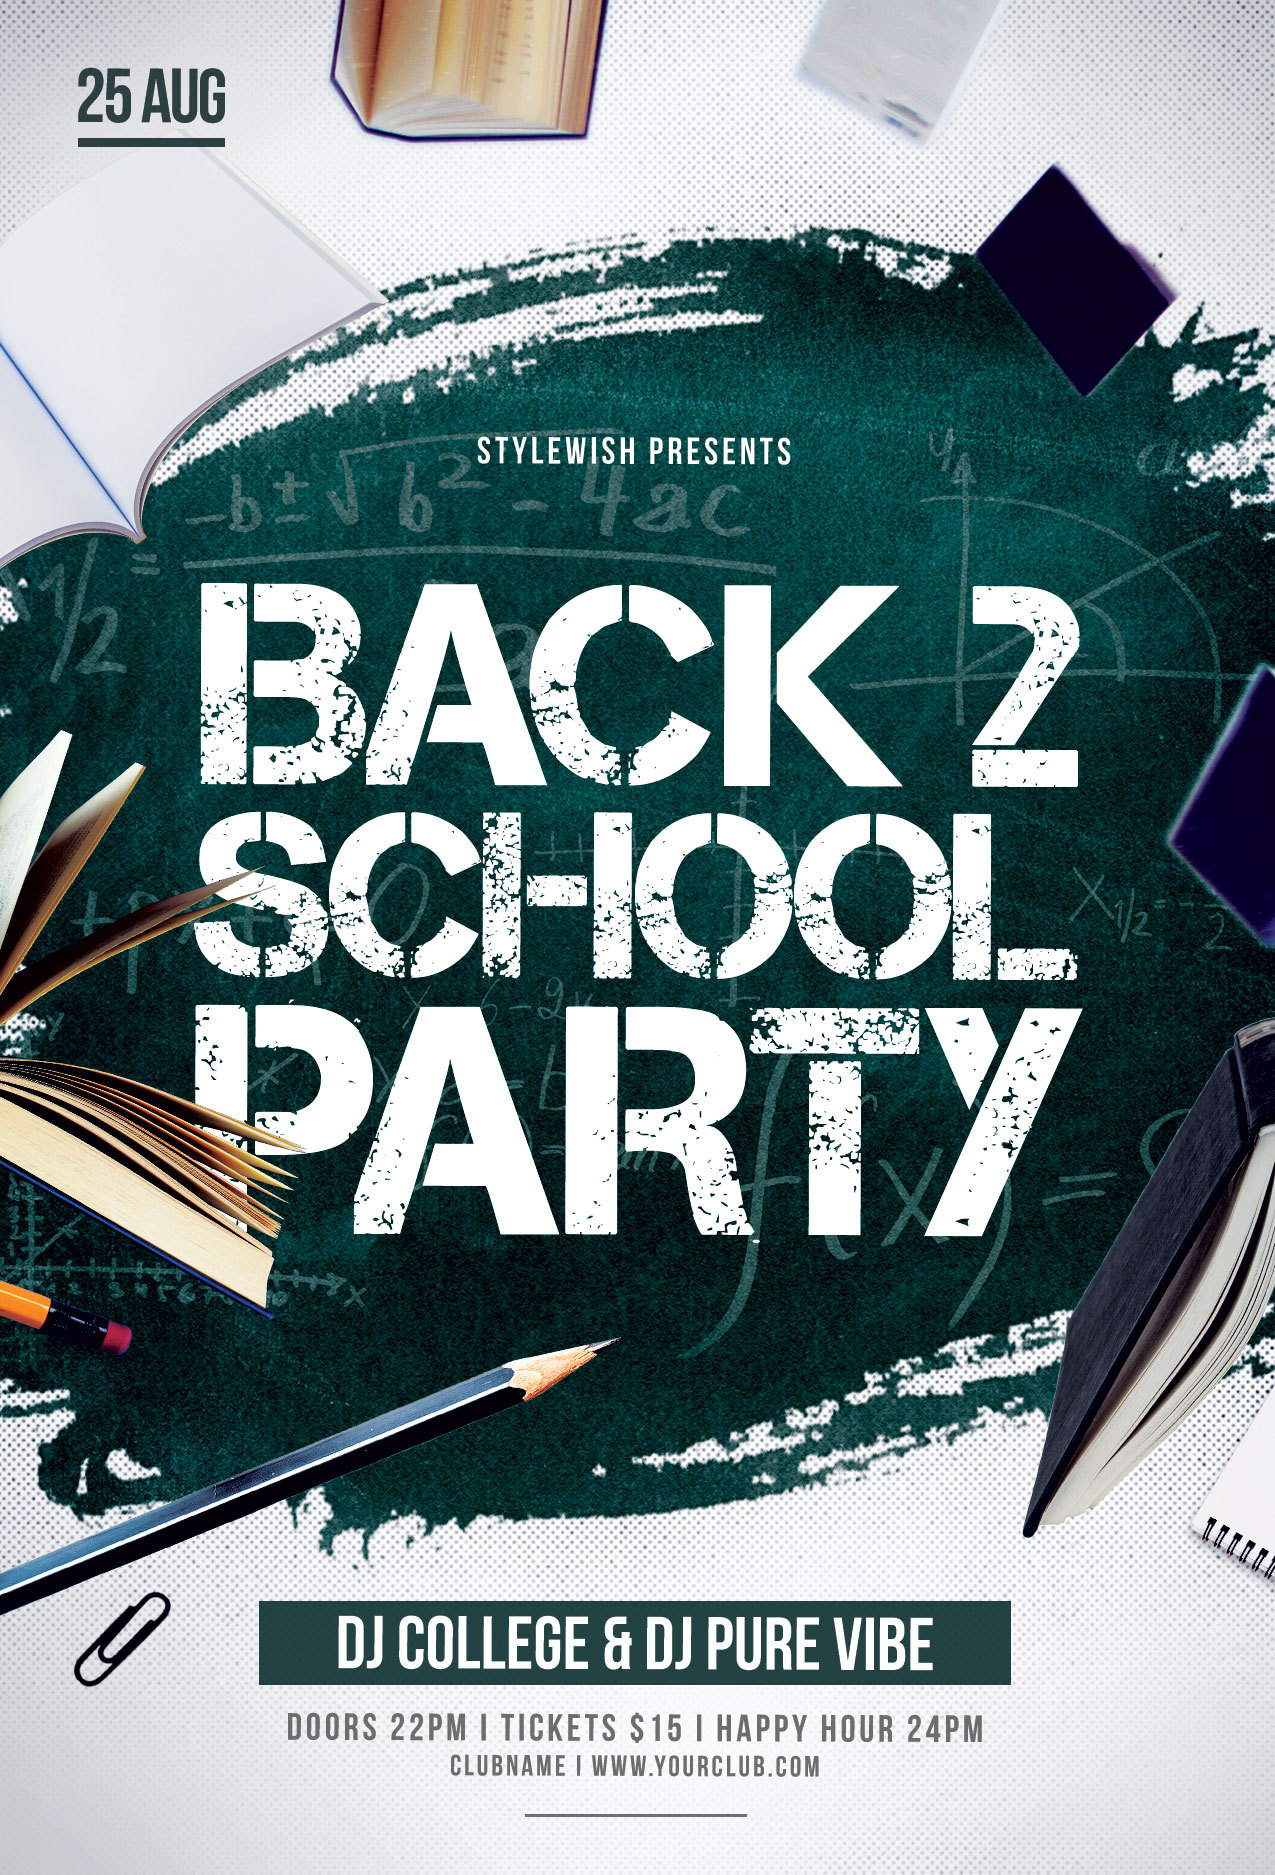 back to school party flyer template, back to school bash flyer template free, back to school event flyer template, back to school flyer word template, free back to school flyer template psd, back to school donation flyer, free back to school flyers, back to school giveaway flyer